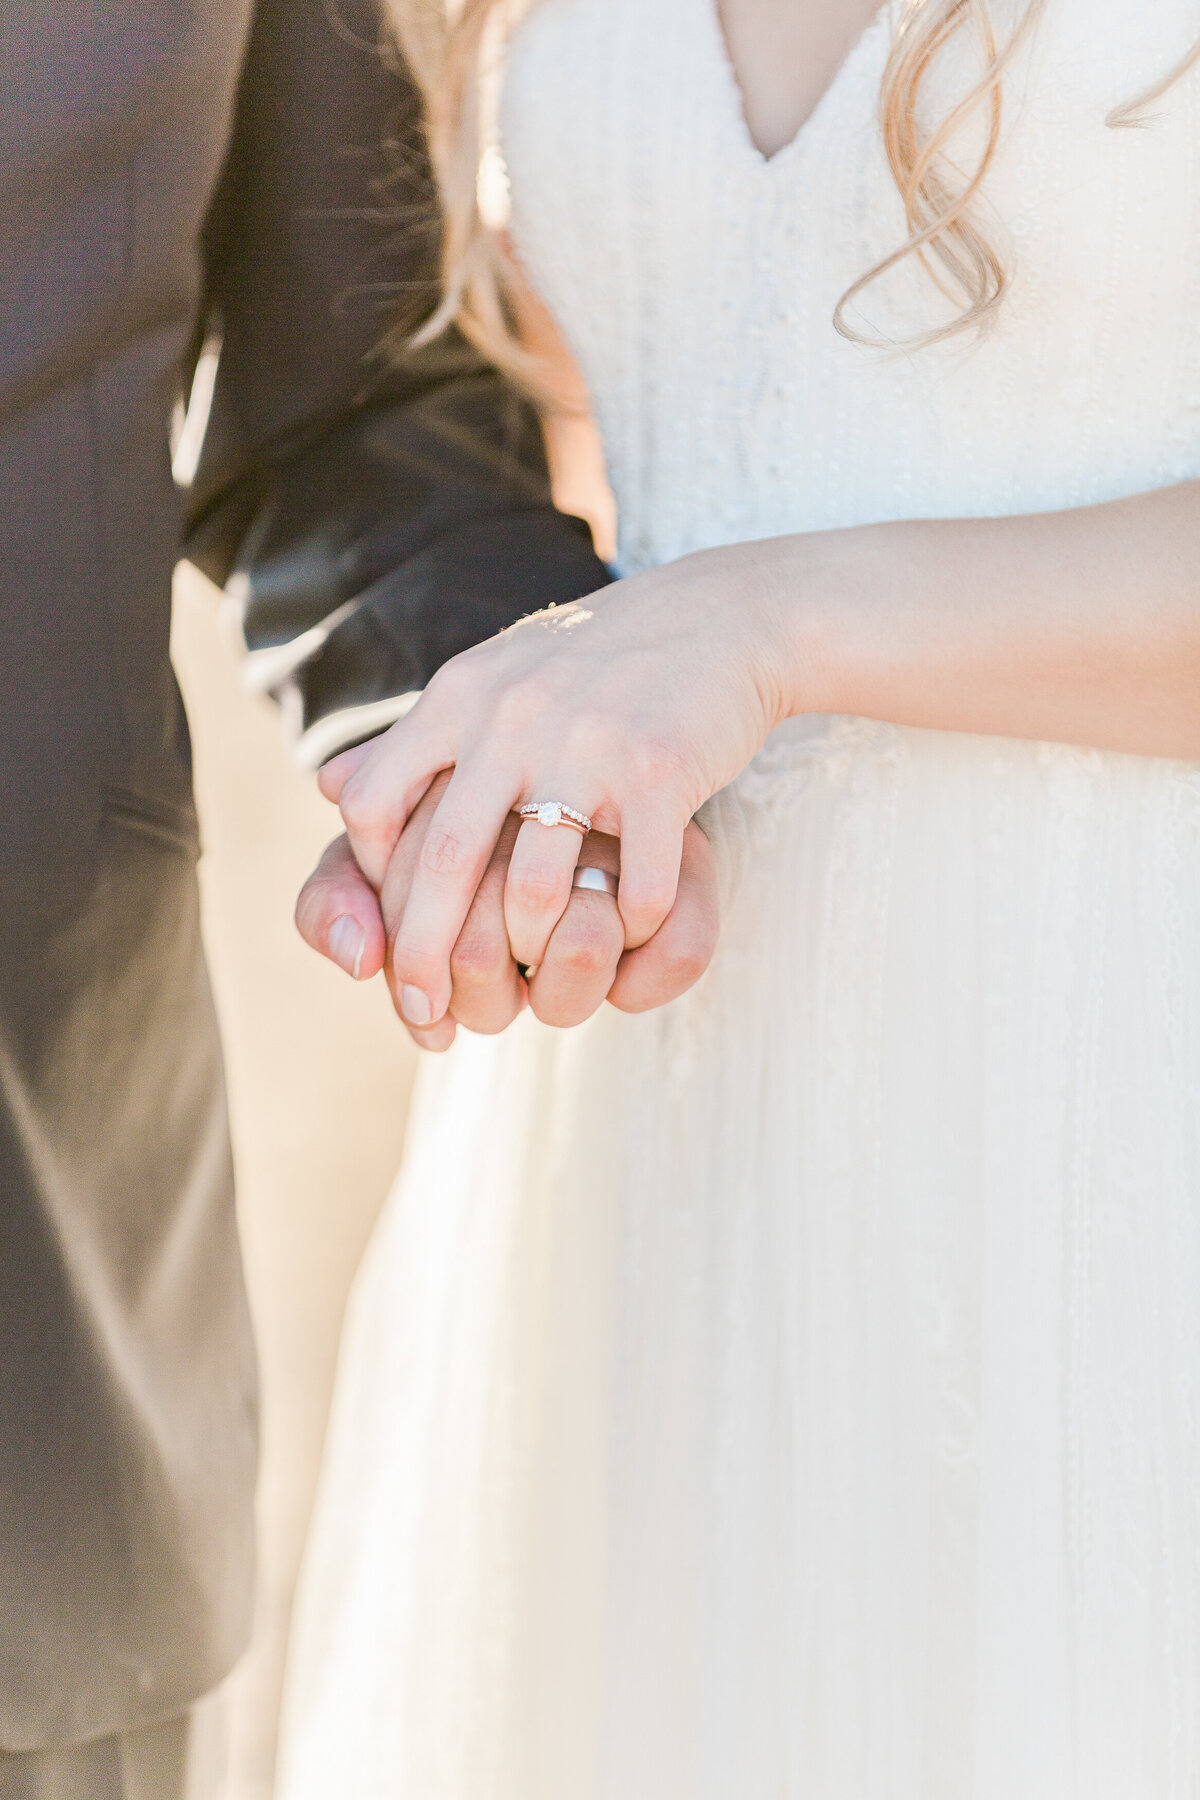 Detail image. Bride and groom are holding hands and featuring their wedding rings. Captured by best New England wedding photographer Lia Rose Weddings.